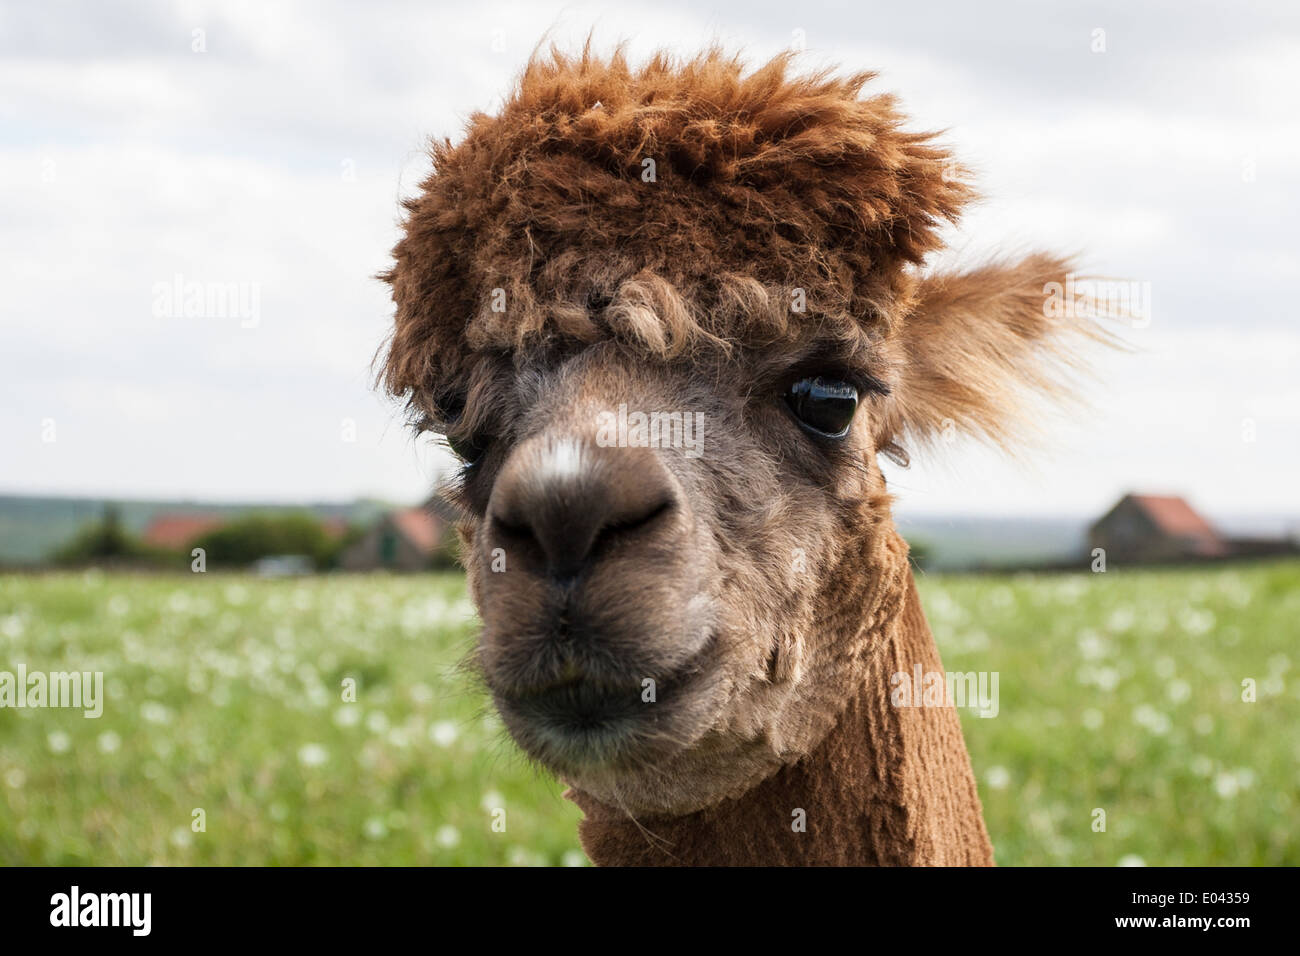 Alpaca's, which are a domesticated species of South American camelid graze on a farm in North Yorkshire. Stock Photo